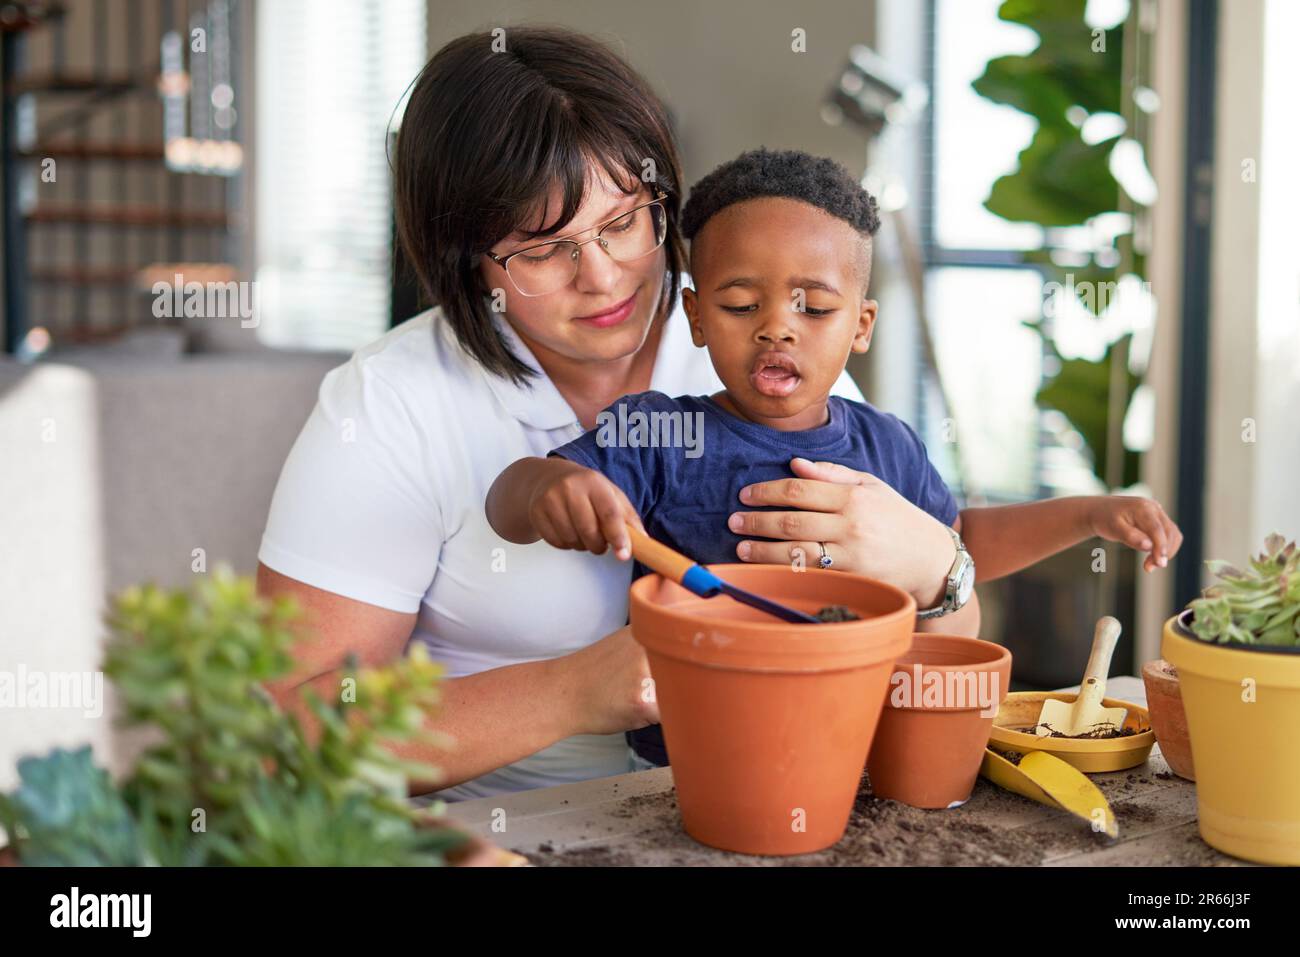 Mother and son planting plants in flowerpots on patio Stock Photo